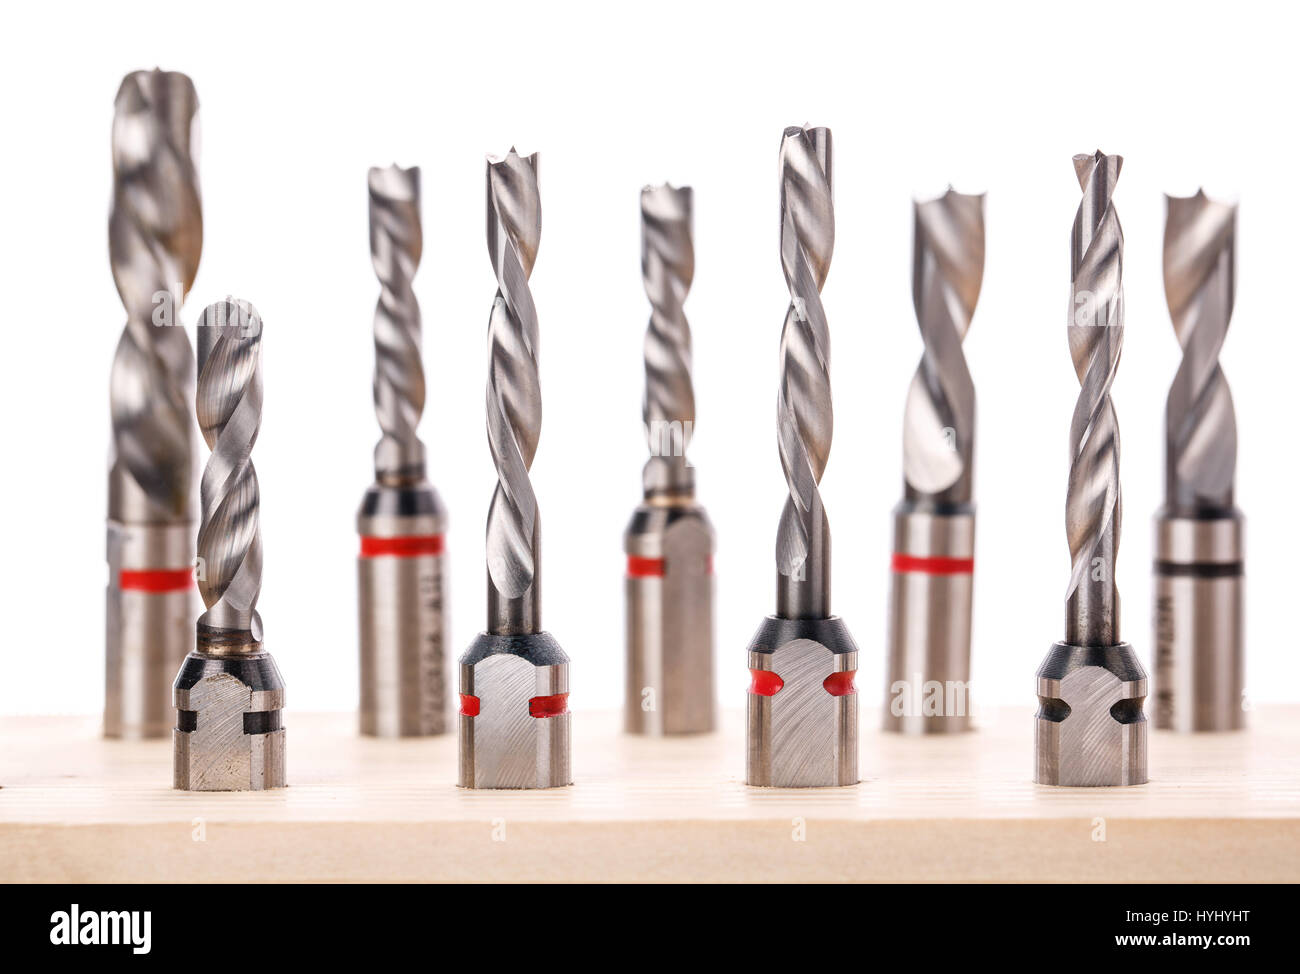 drill bits for wood standing on wooden stand Stock Photo